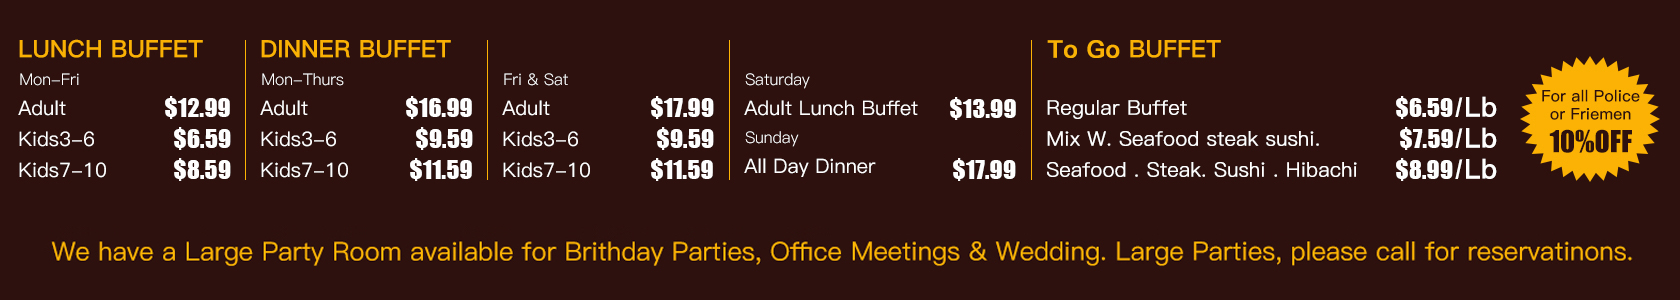 flaming grill buffet price